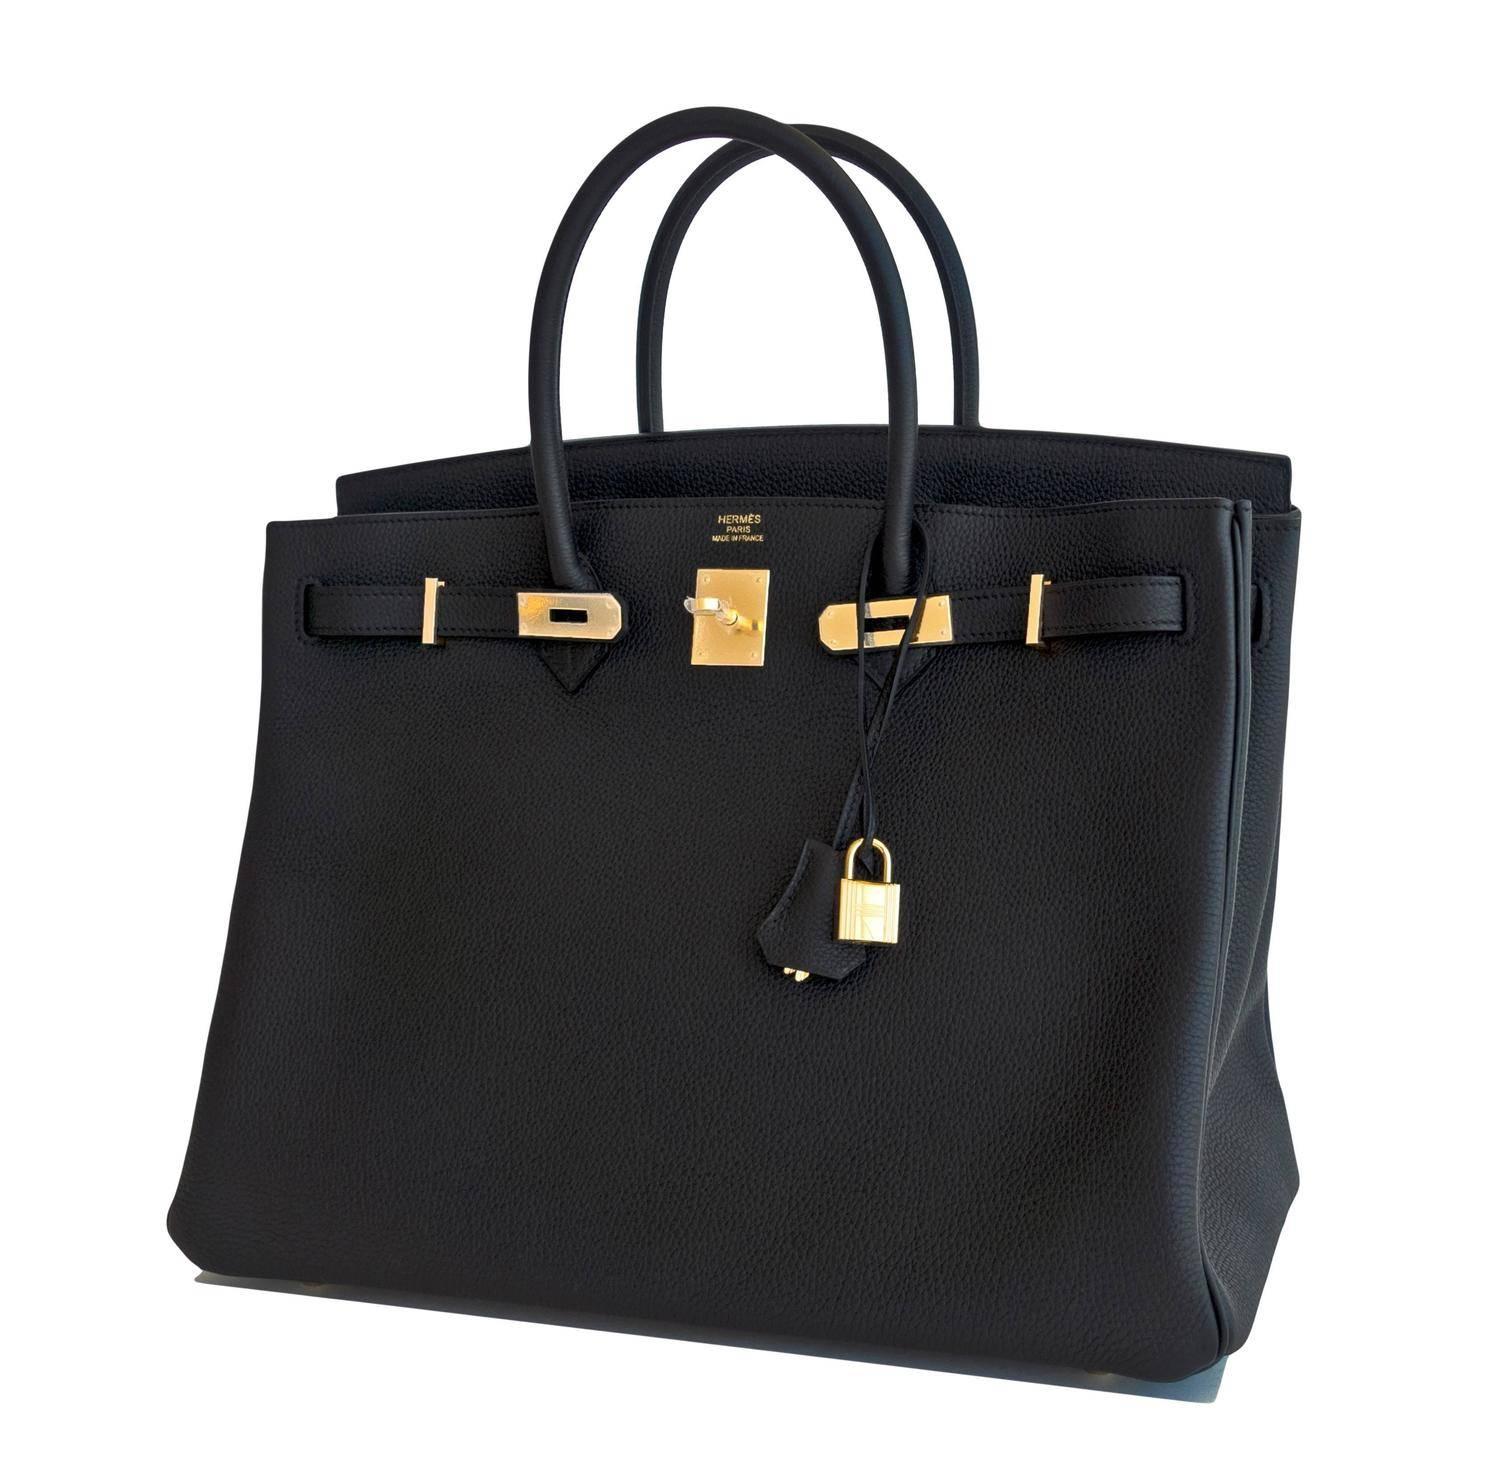 Hermes Black Togo 40cm Birkin Gold Hardware GHW Power Birkin 
Brand New in Box. Store fresh. Pristine Condition (with plastic on hardware). 
Perfect gift! Just purchased from Hermes store.
Comes with lock, keys, clochette, sleeper, raincoat, and